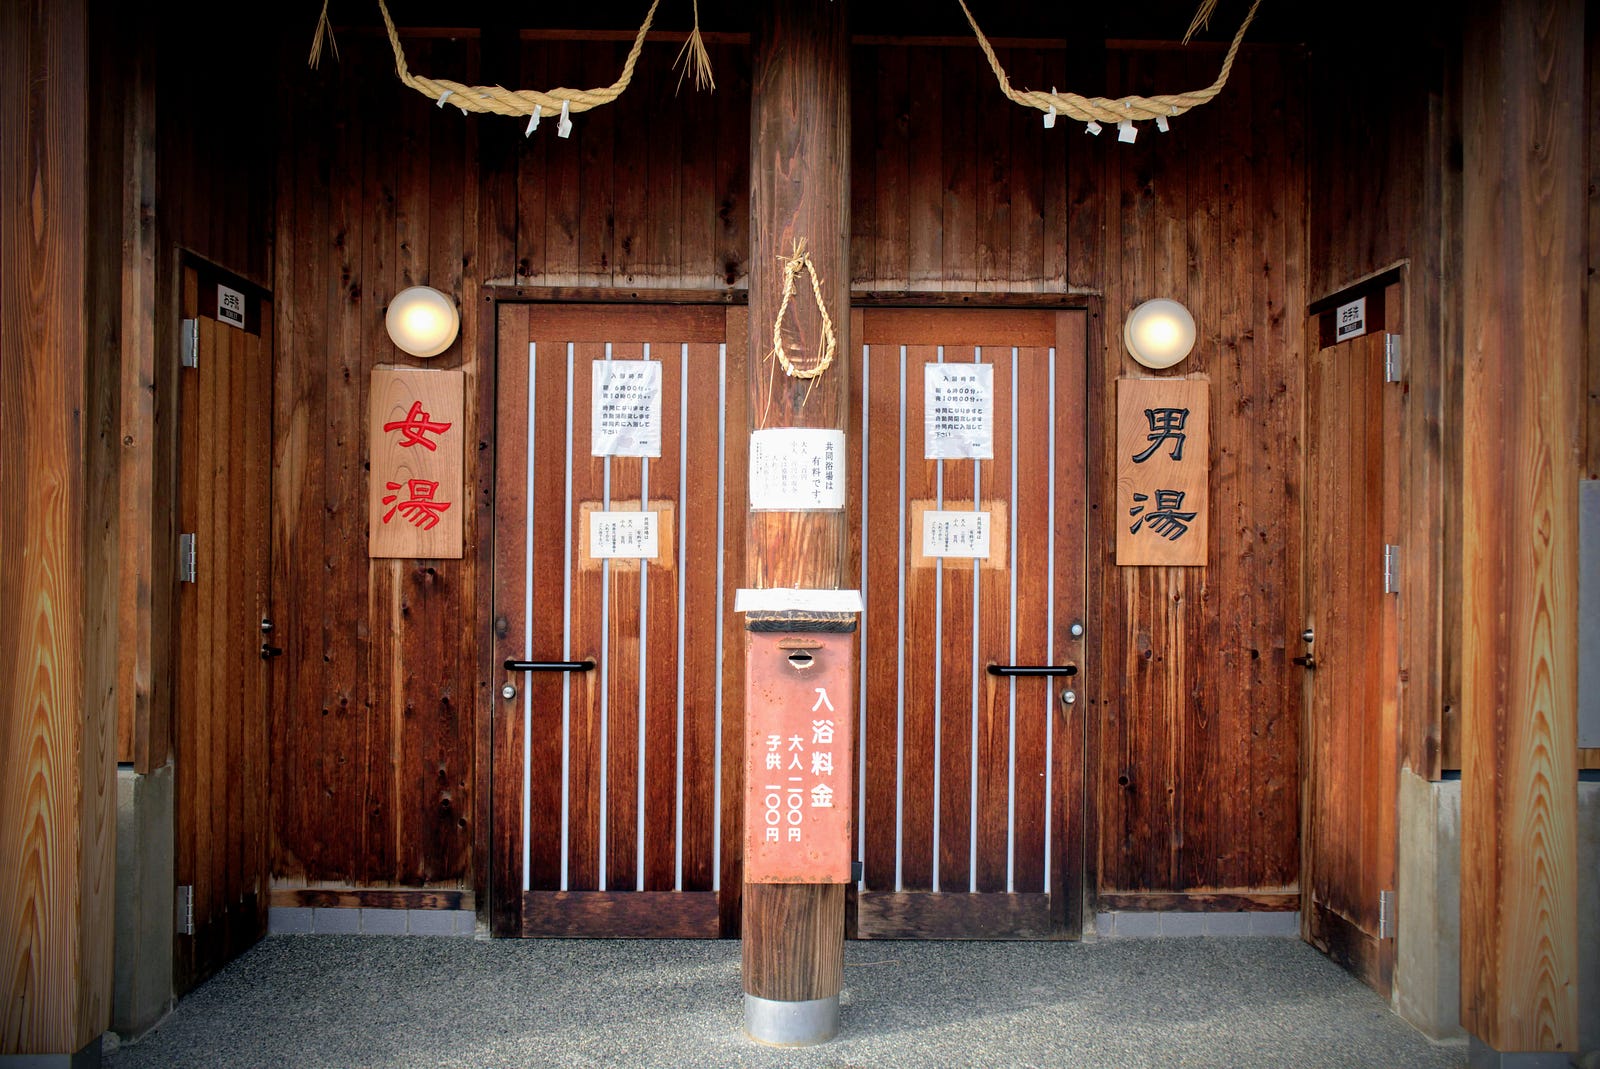 The all-wood entrance to an Onsen hot spring on Zao-san, females to the left, males to the right, each with their own Shime-nawa rope with white lightning-shaped tassles for protection.